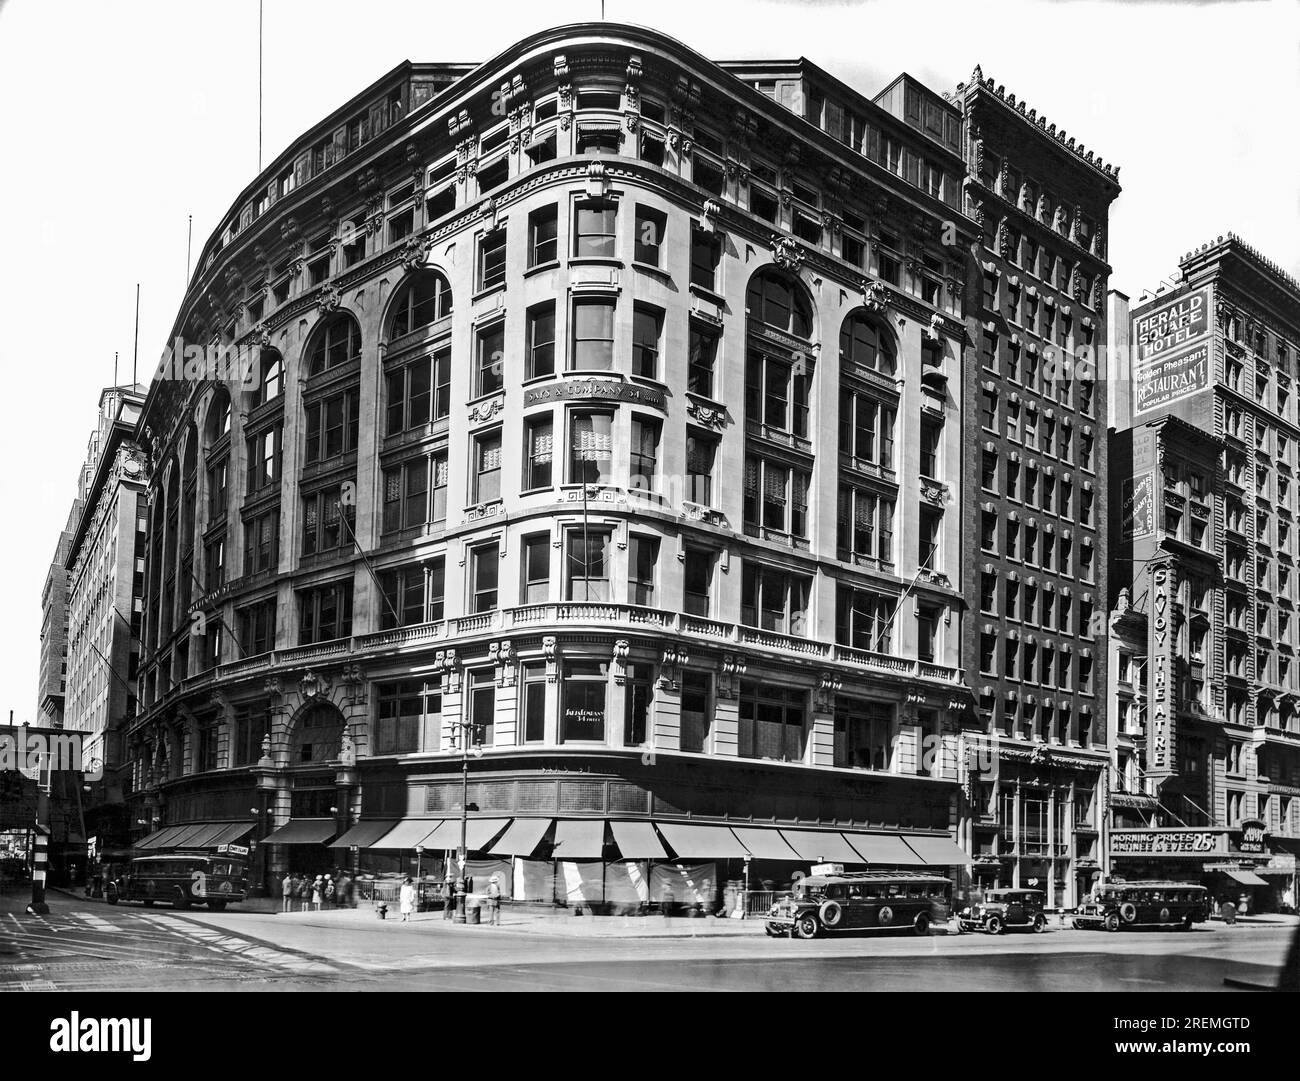 New York, New York   c 1928. The Saks-Herald Square department store at Broadway and 34th St. in Manhattan. Stock Photo